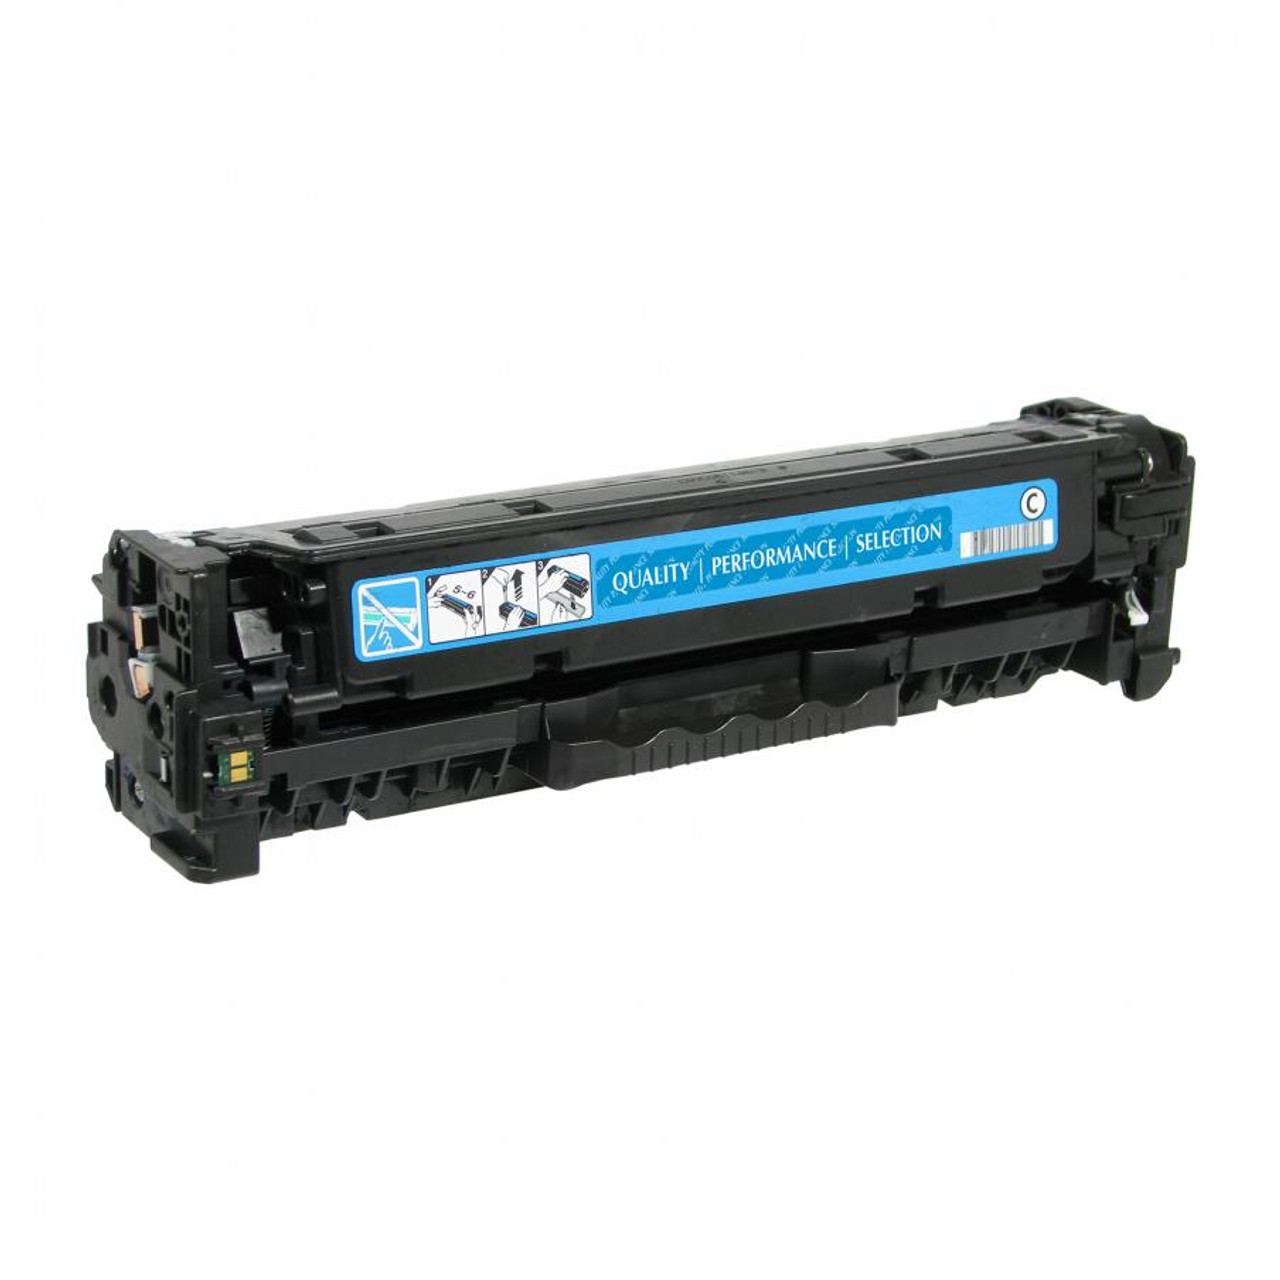 Clover Imaging Remanufactured for HP CE410X(J) 305A CE411A Cyan For use in HP M351 M375 M375NW M451 M451DN M451DW M451NW M475 M475DN  Toner Cartridge 3200 Page Yield